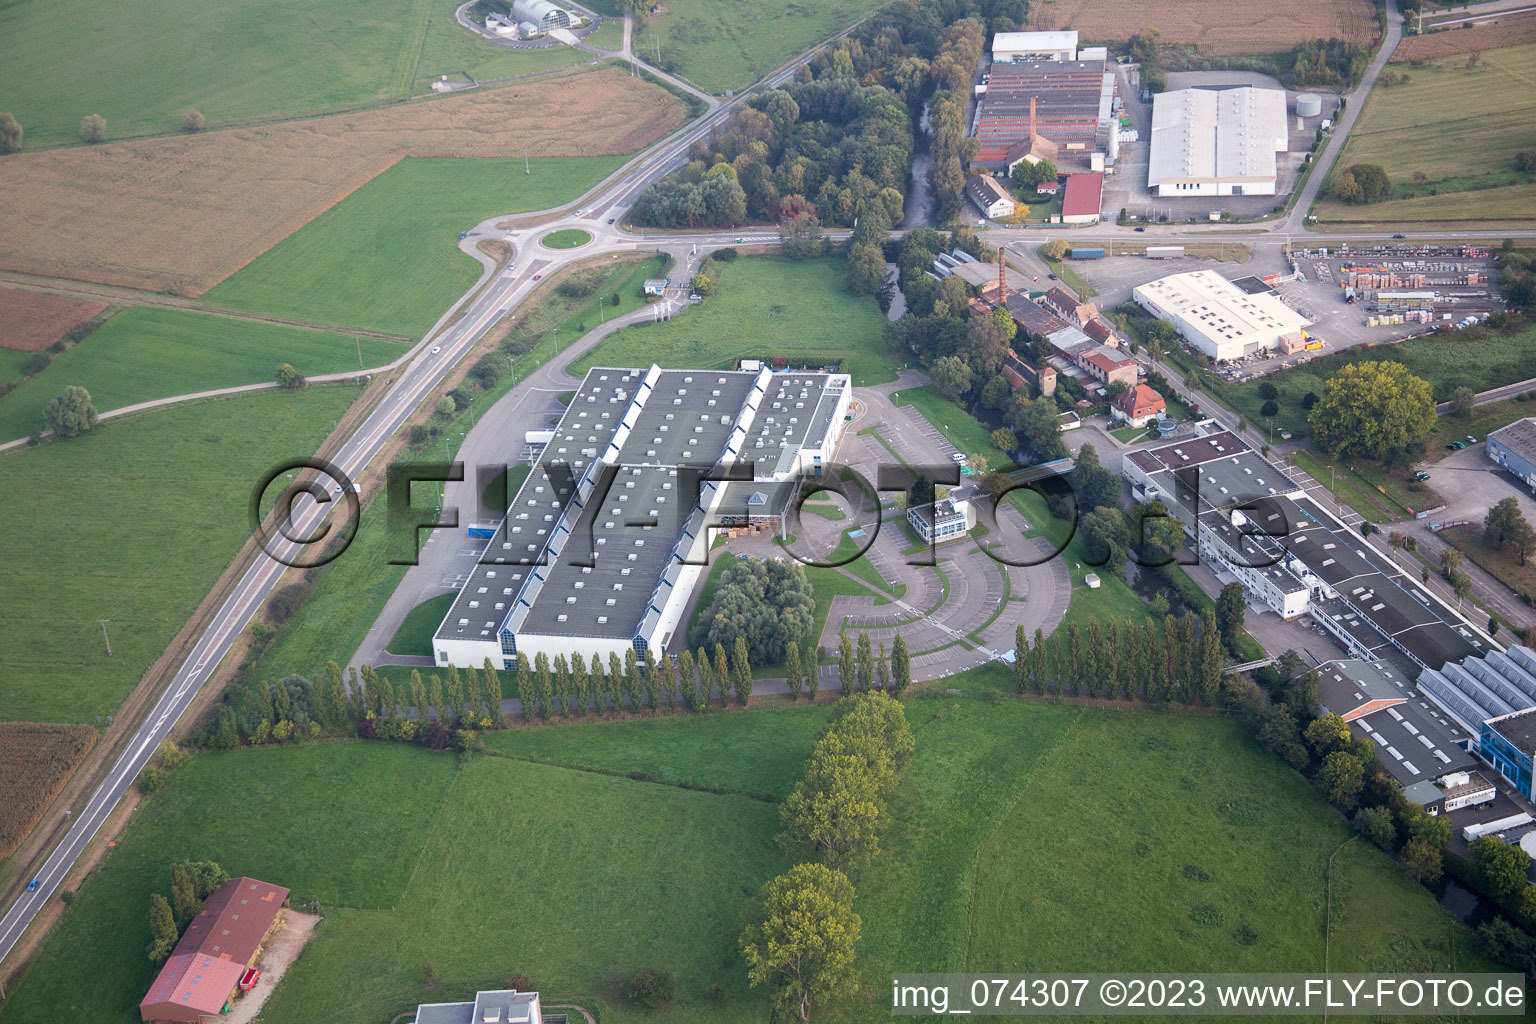 Aerial view of Bischwiller in the state Bas-Rhin, France